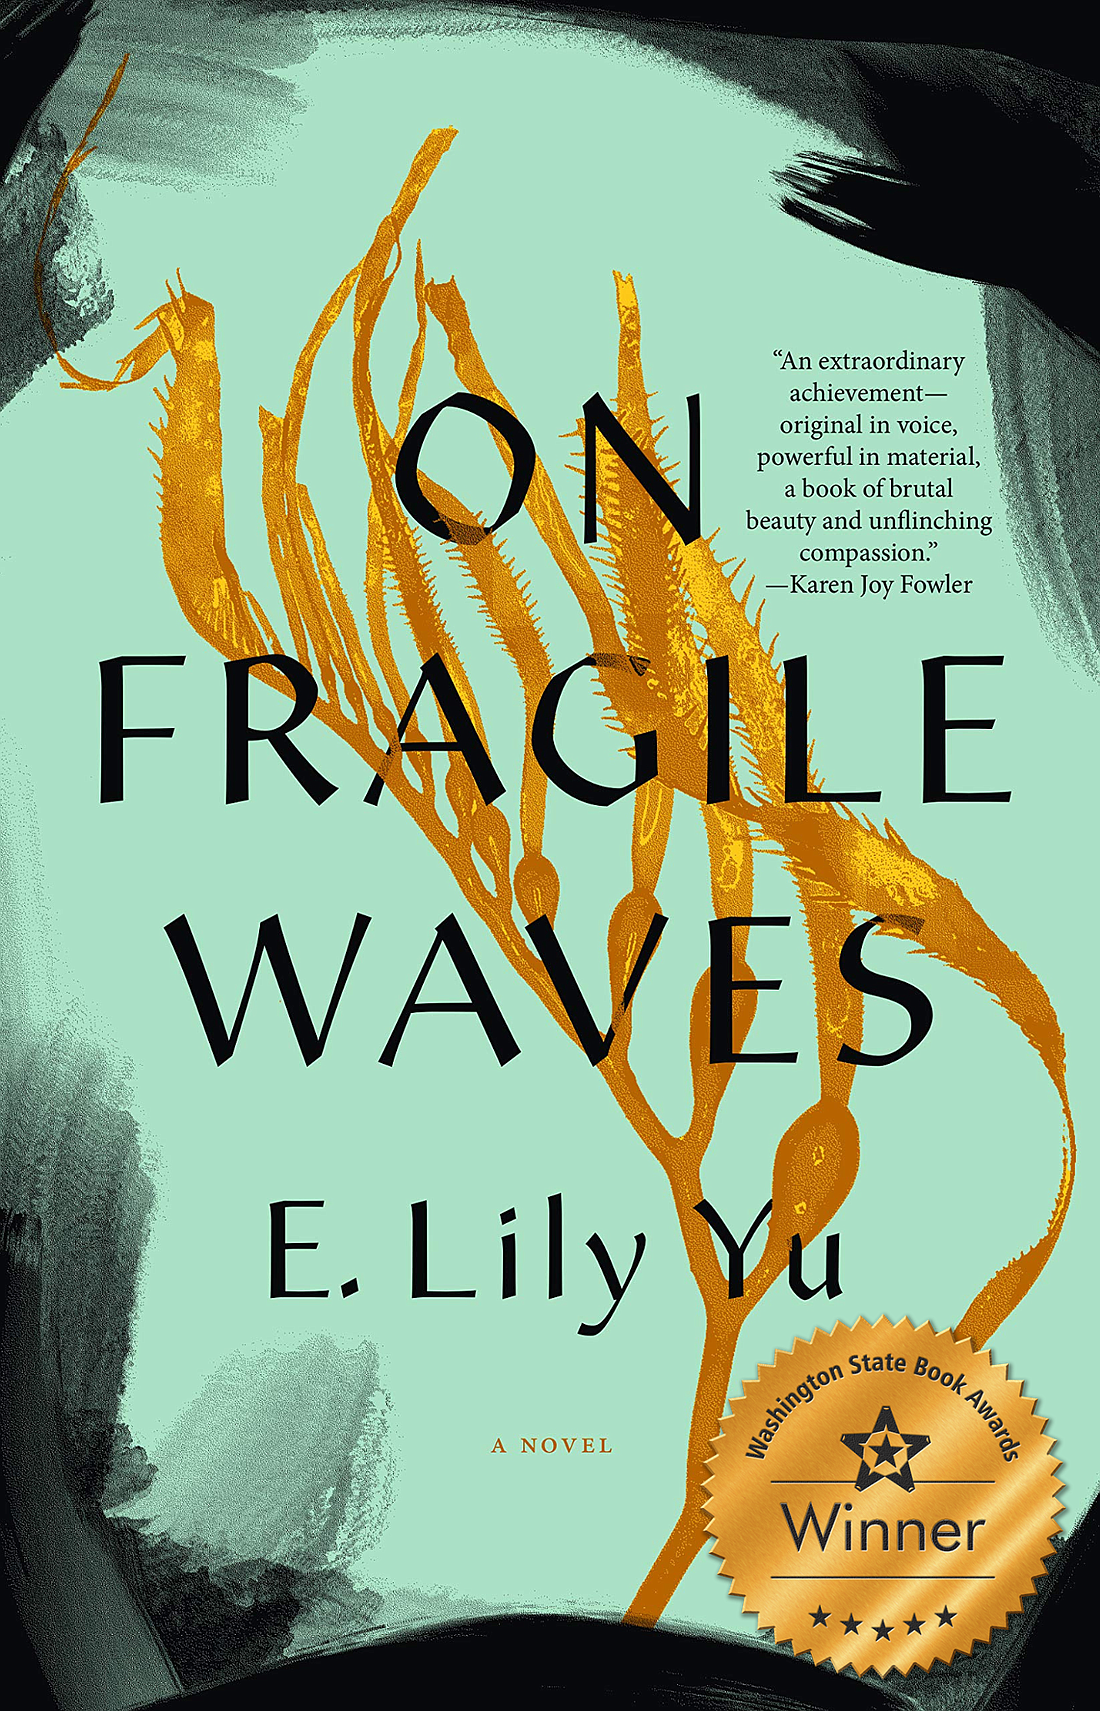 E. Lily Yu’s award-winning novel focuses on two Afghan children whose family flees their war-torn home only to face an uncertain future in Australia. Yu weaves poetry, elements of the supernatural and simple, direct dialogue into a story that is timeless and yet of this time.